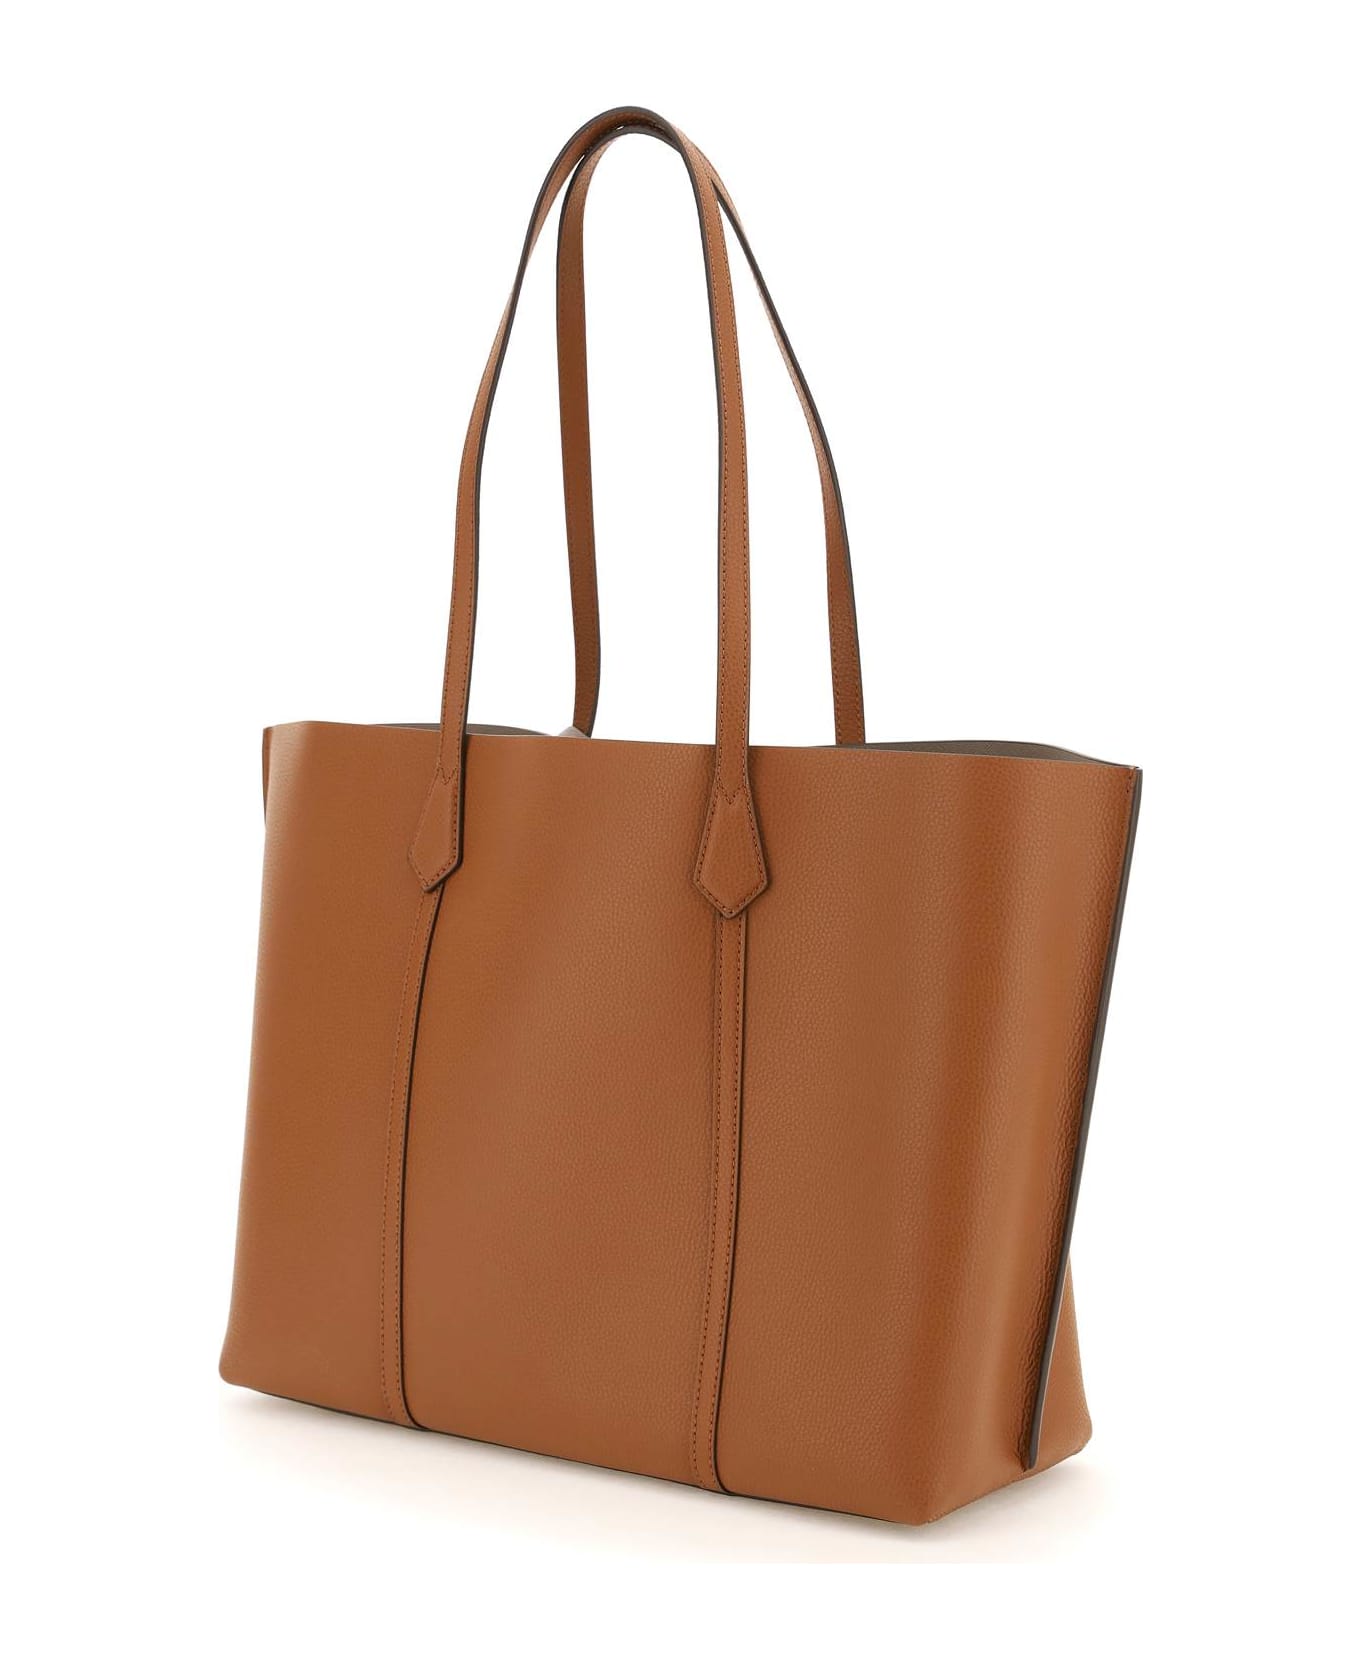 Tory Burch 'perry' Medium Tote - Brown トートバッグ